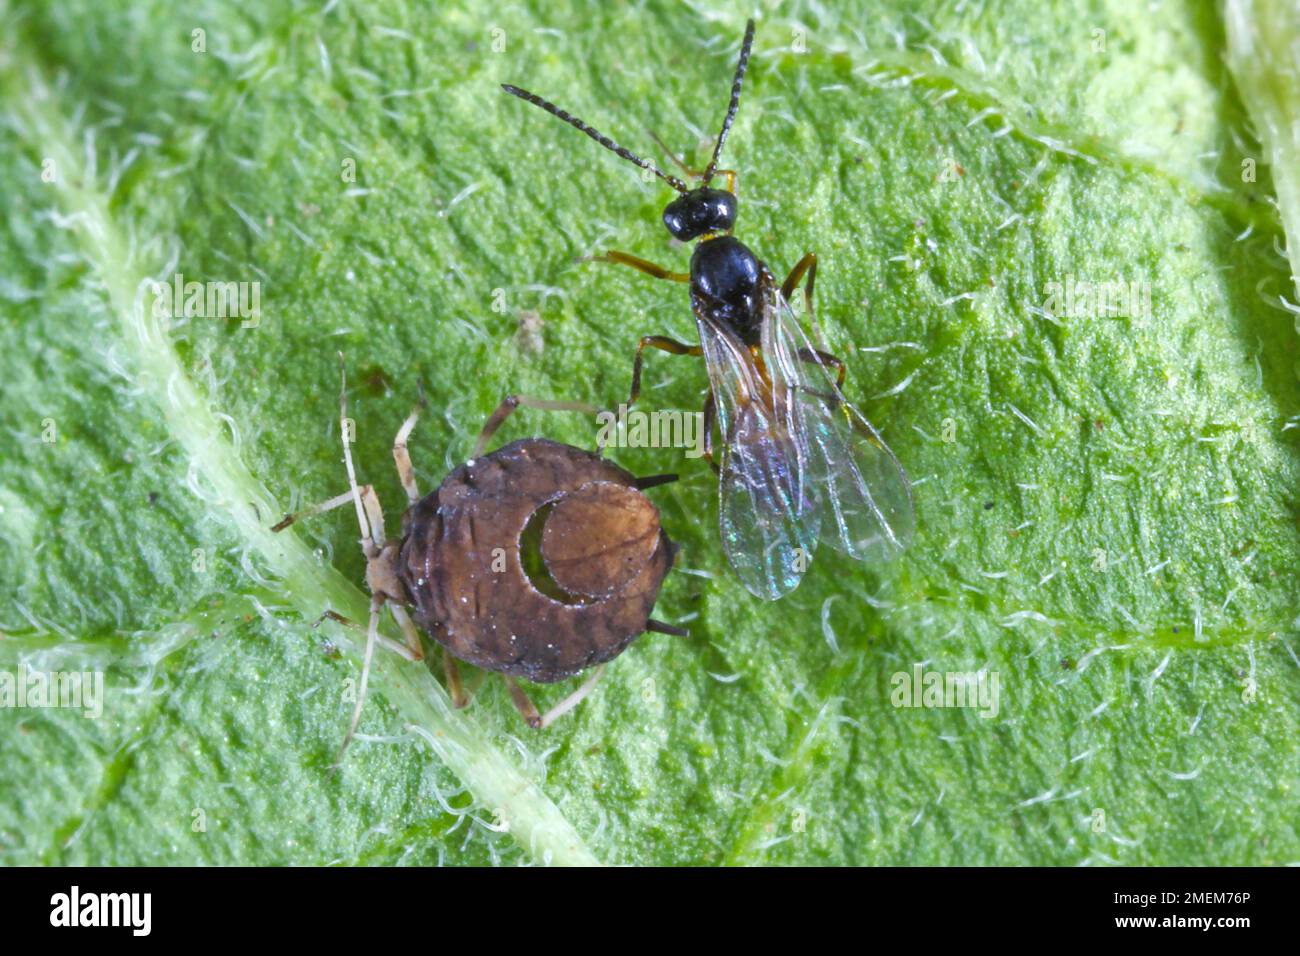 The black bean aphid (Aphis fabae) parasitized by Diaeretiella rapae (Hymenoptera: Braconidae). It is a cosmopolitan parasitoid of many species of aph Stock Photo